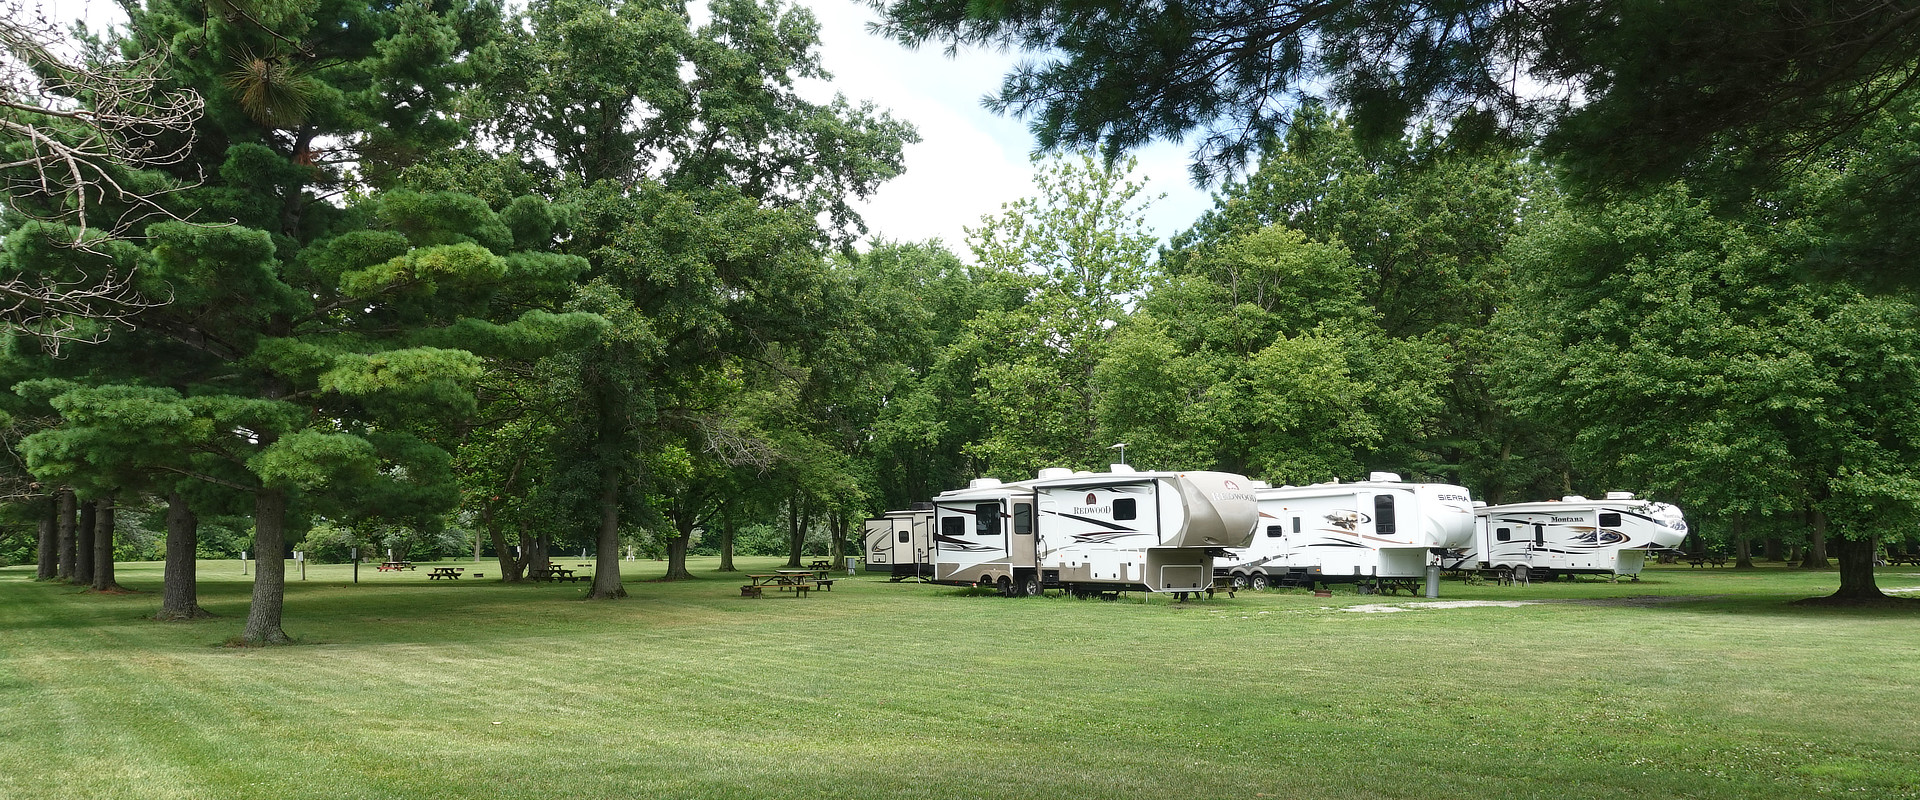 Big field, pine trees, and RV sites